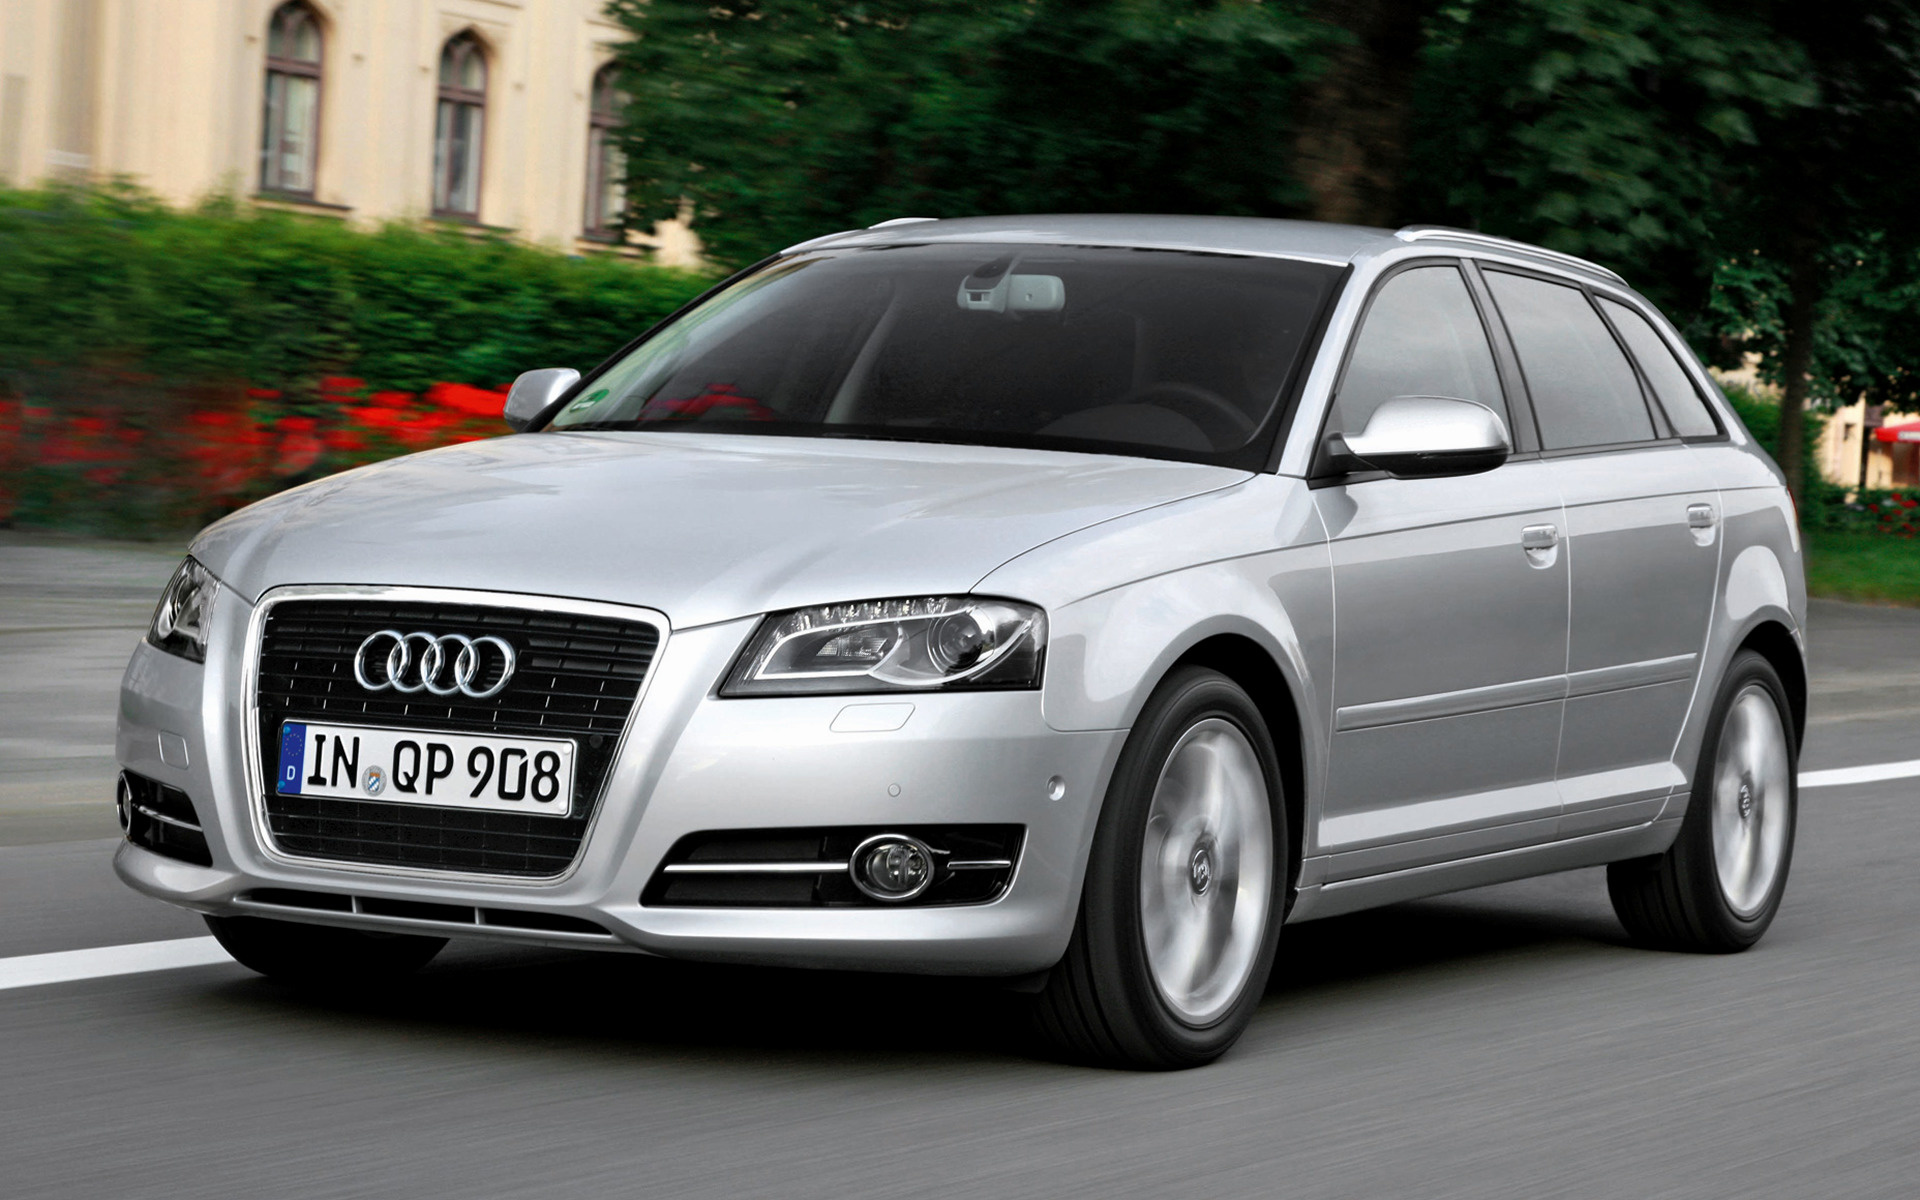 2008 Audi A3 ( 8P ) by Sportec #292865 - Best quality free high resolution  car images - mad4wheels